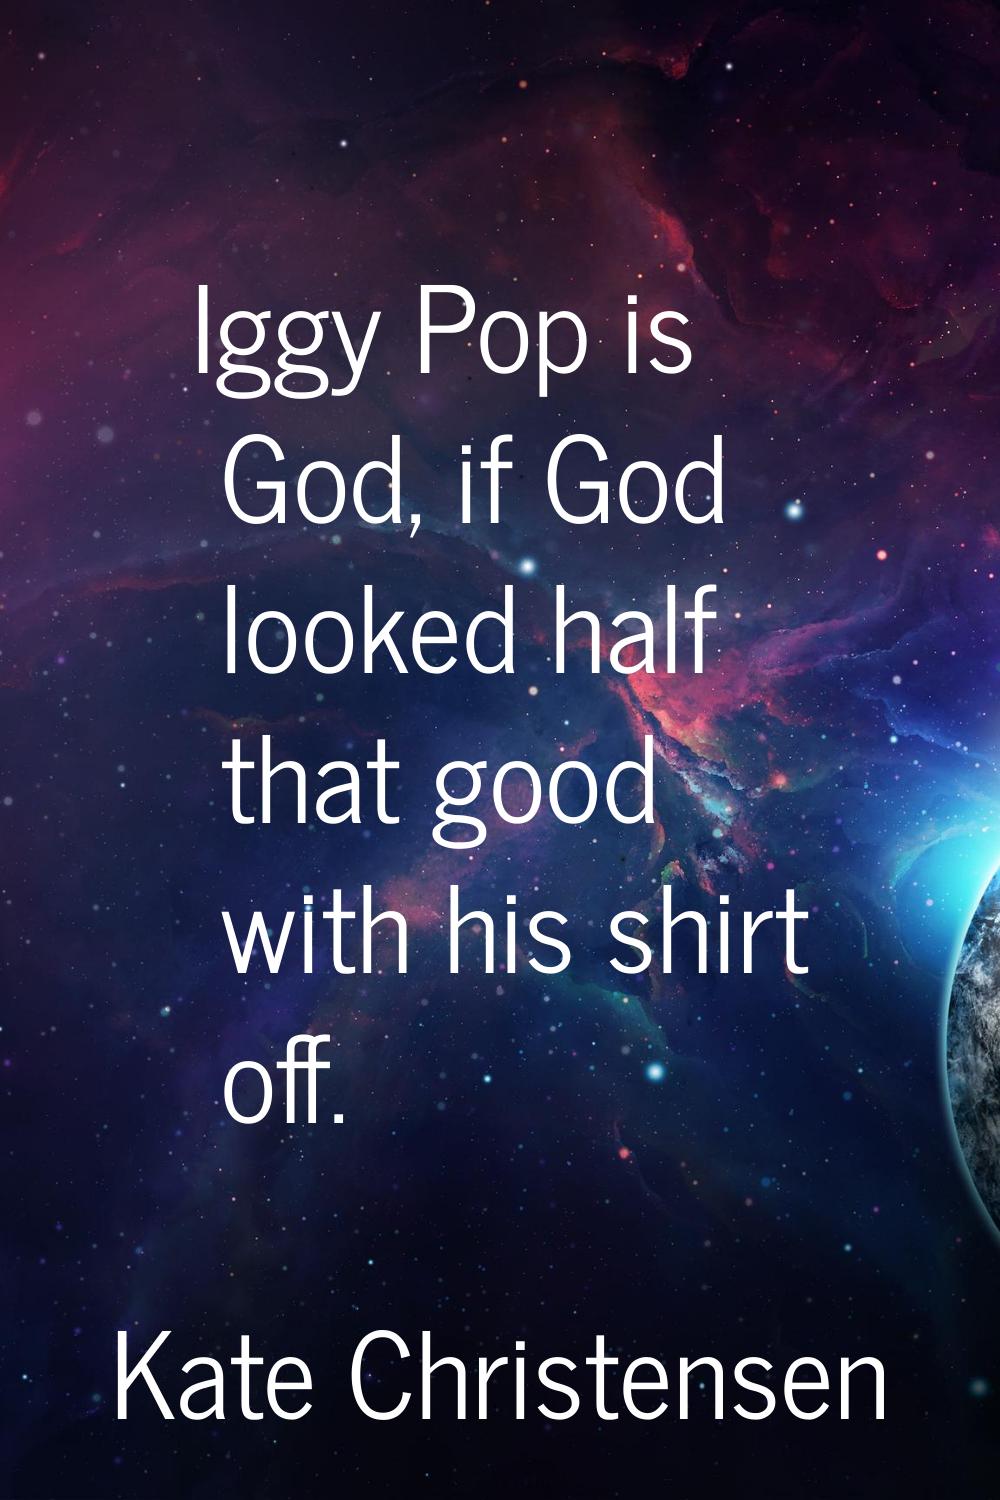 Iggy Pop is God, if God looked half that good with his shirt off.